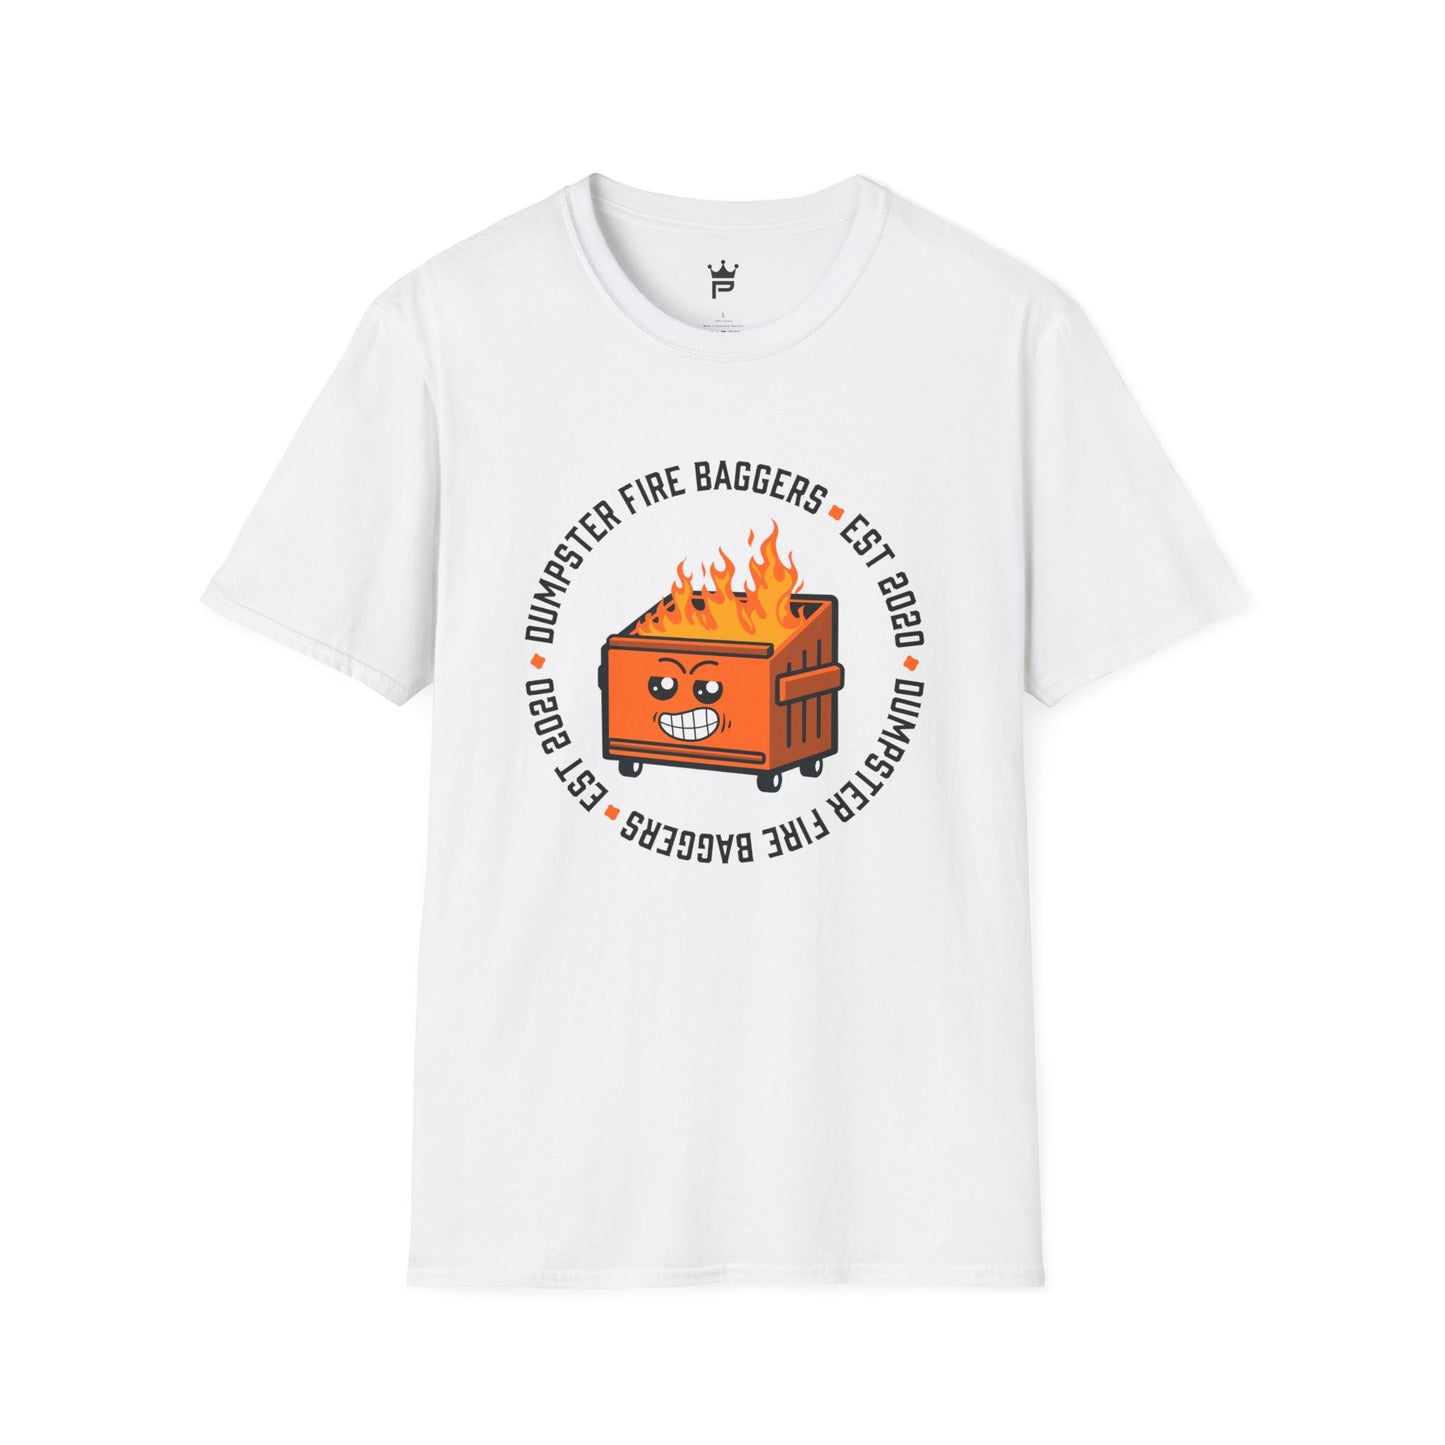 DFB ANGRY DUMPSTER T-SHIRT